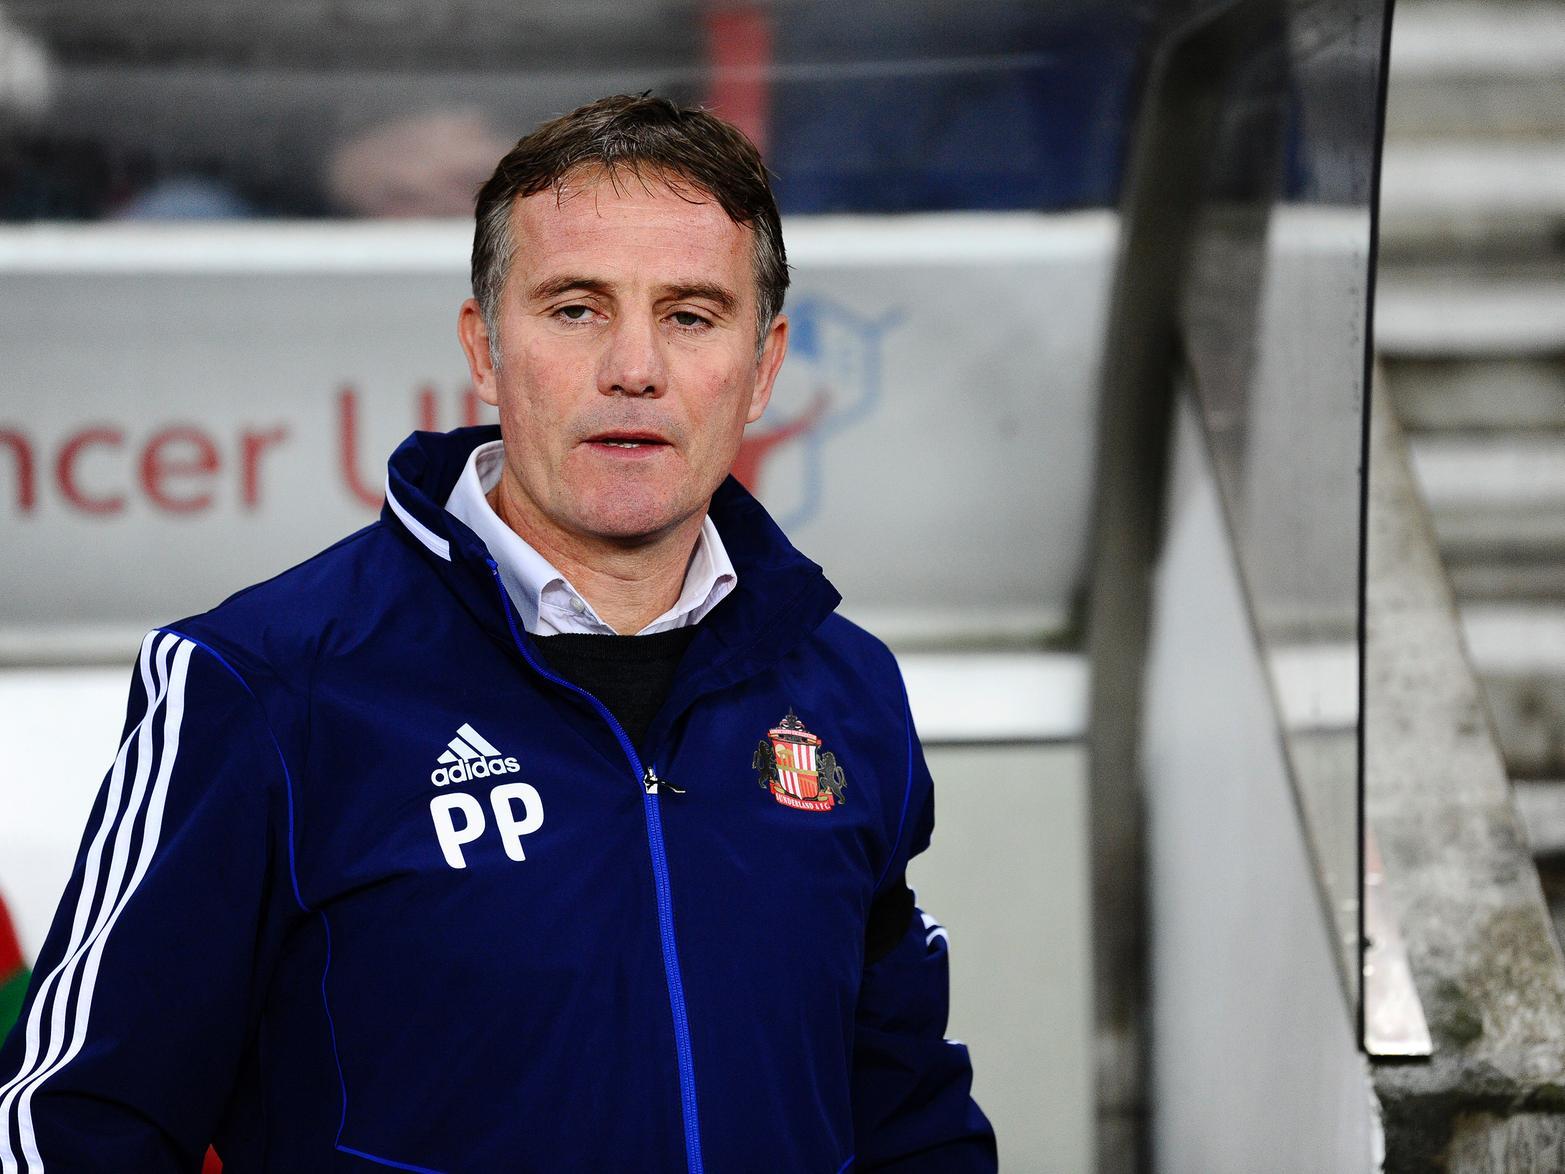 Phil Parkinson has revealed he and Tony Coton have drawn up a list of transfer targets while insisting Sunderland must remain patient in January. (Sunderland Echo)